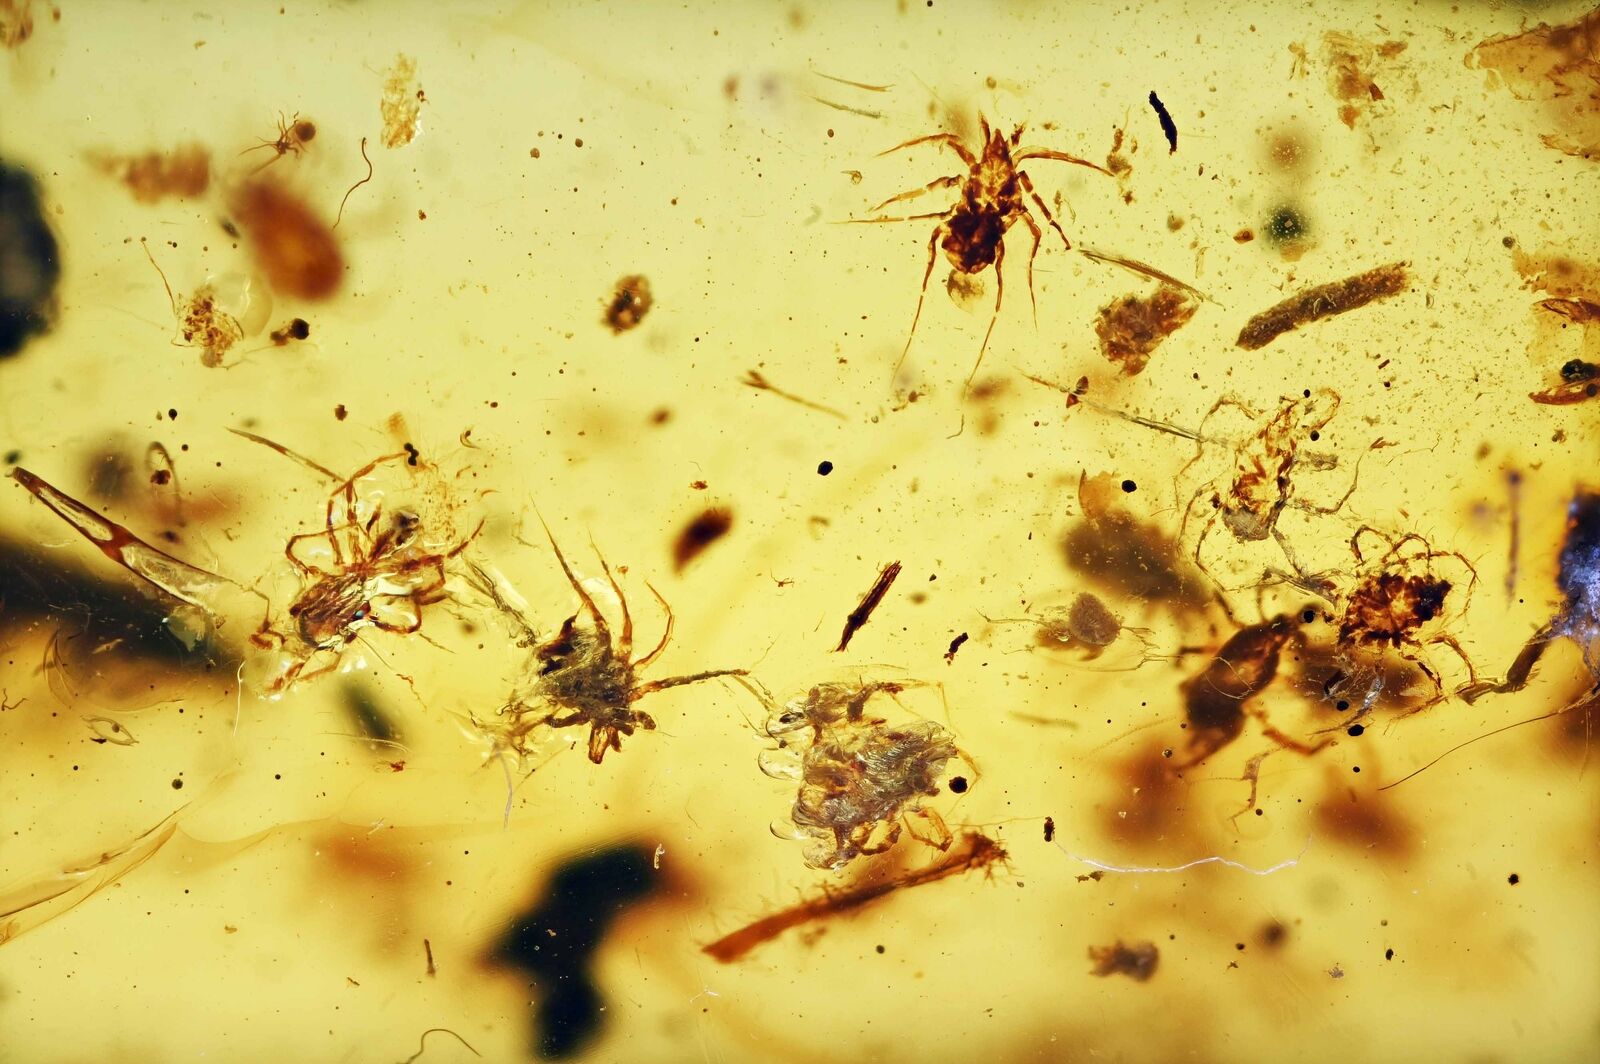 Large Swarm of Acari (mites), Fossil inclusion in Burmese Amber